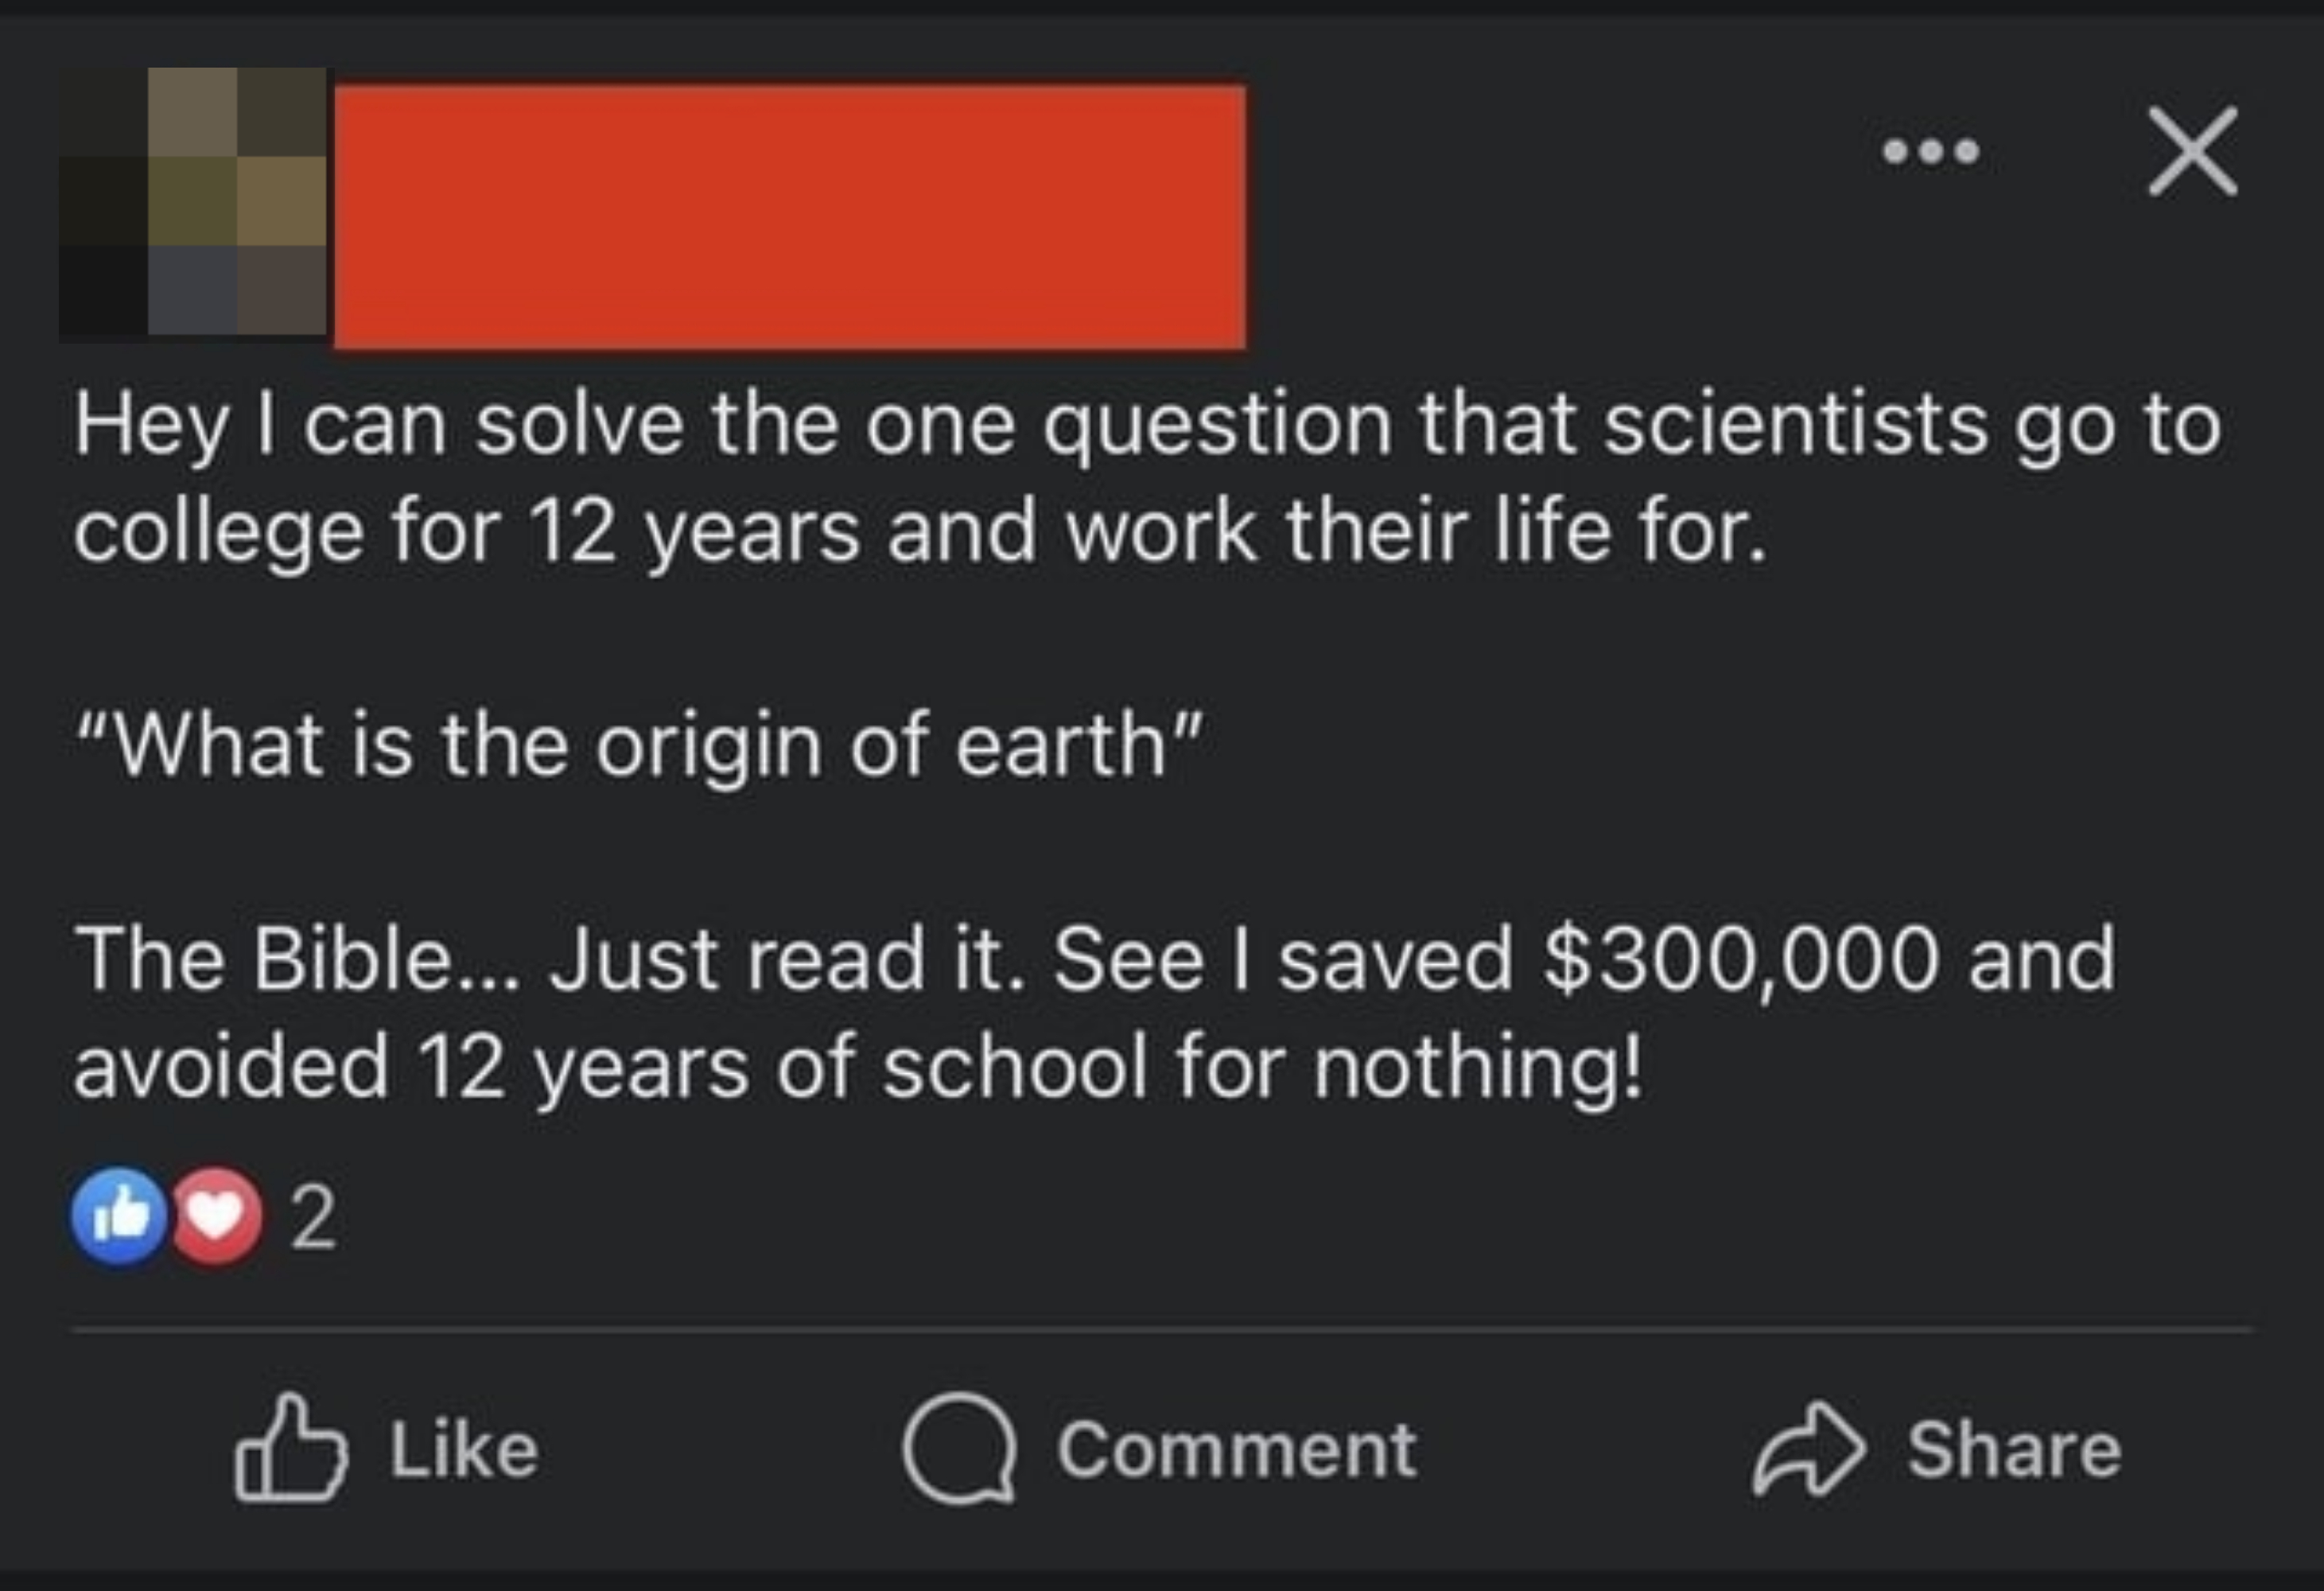 what is the origin of earth, the bible just read it, see i saved you 300,000 dollars and avoided 12 years of school for nothing